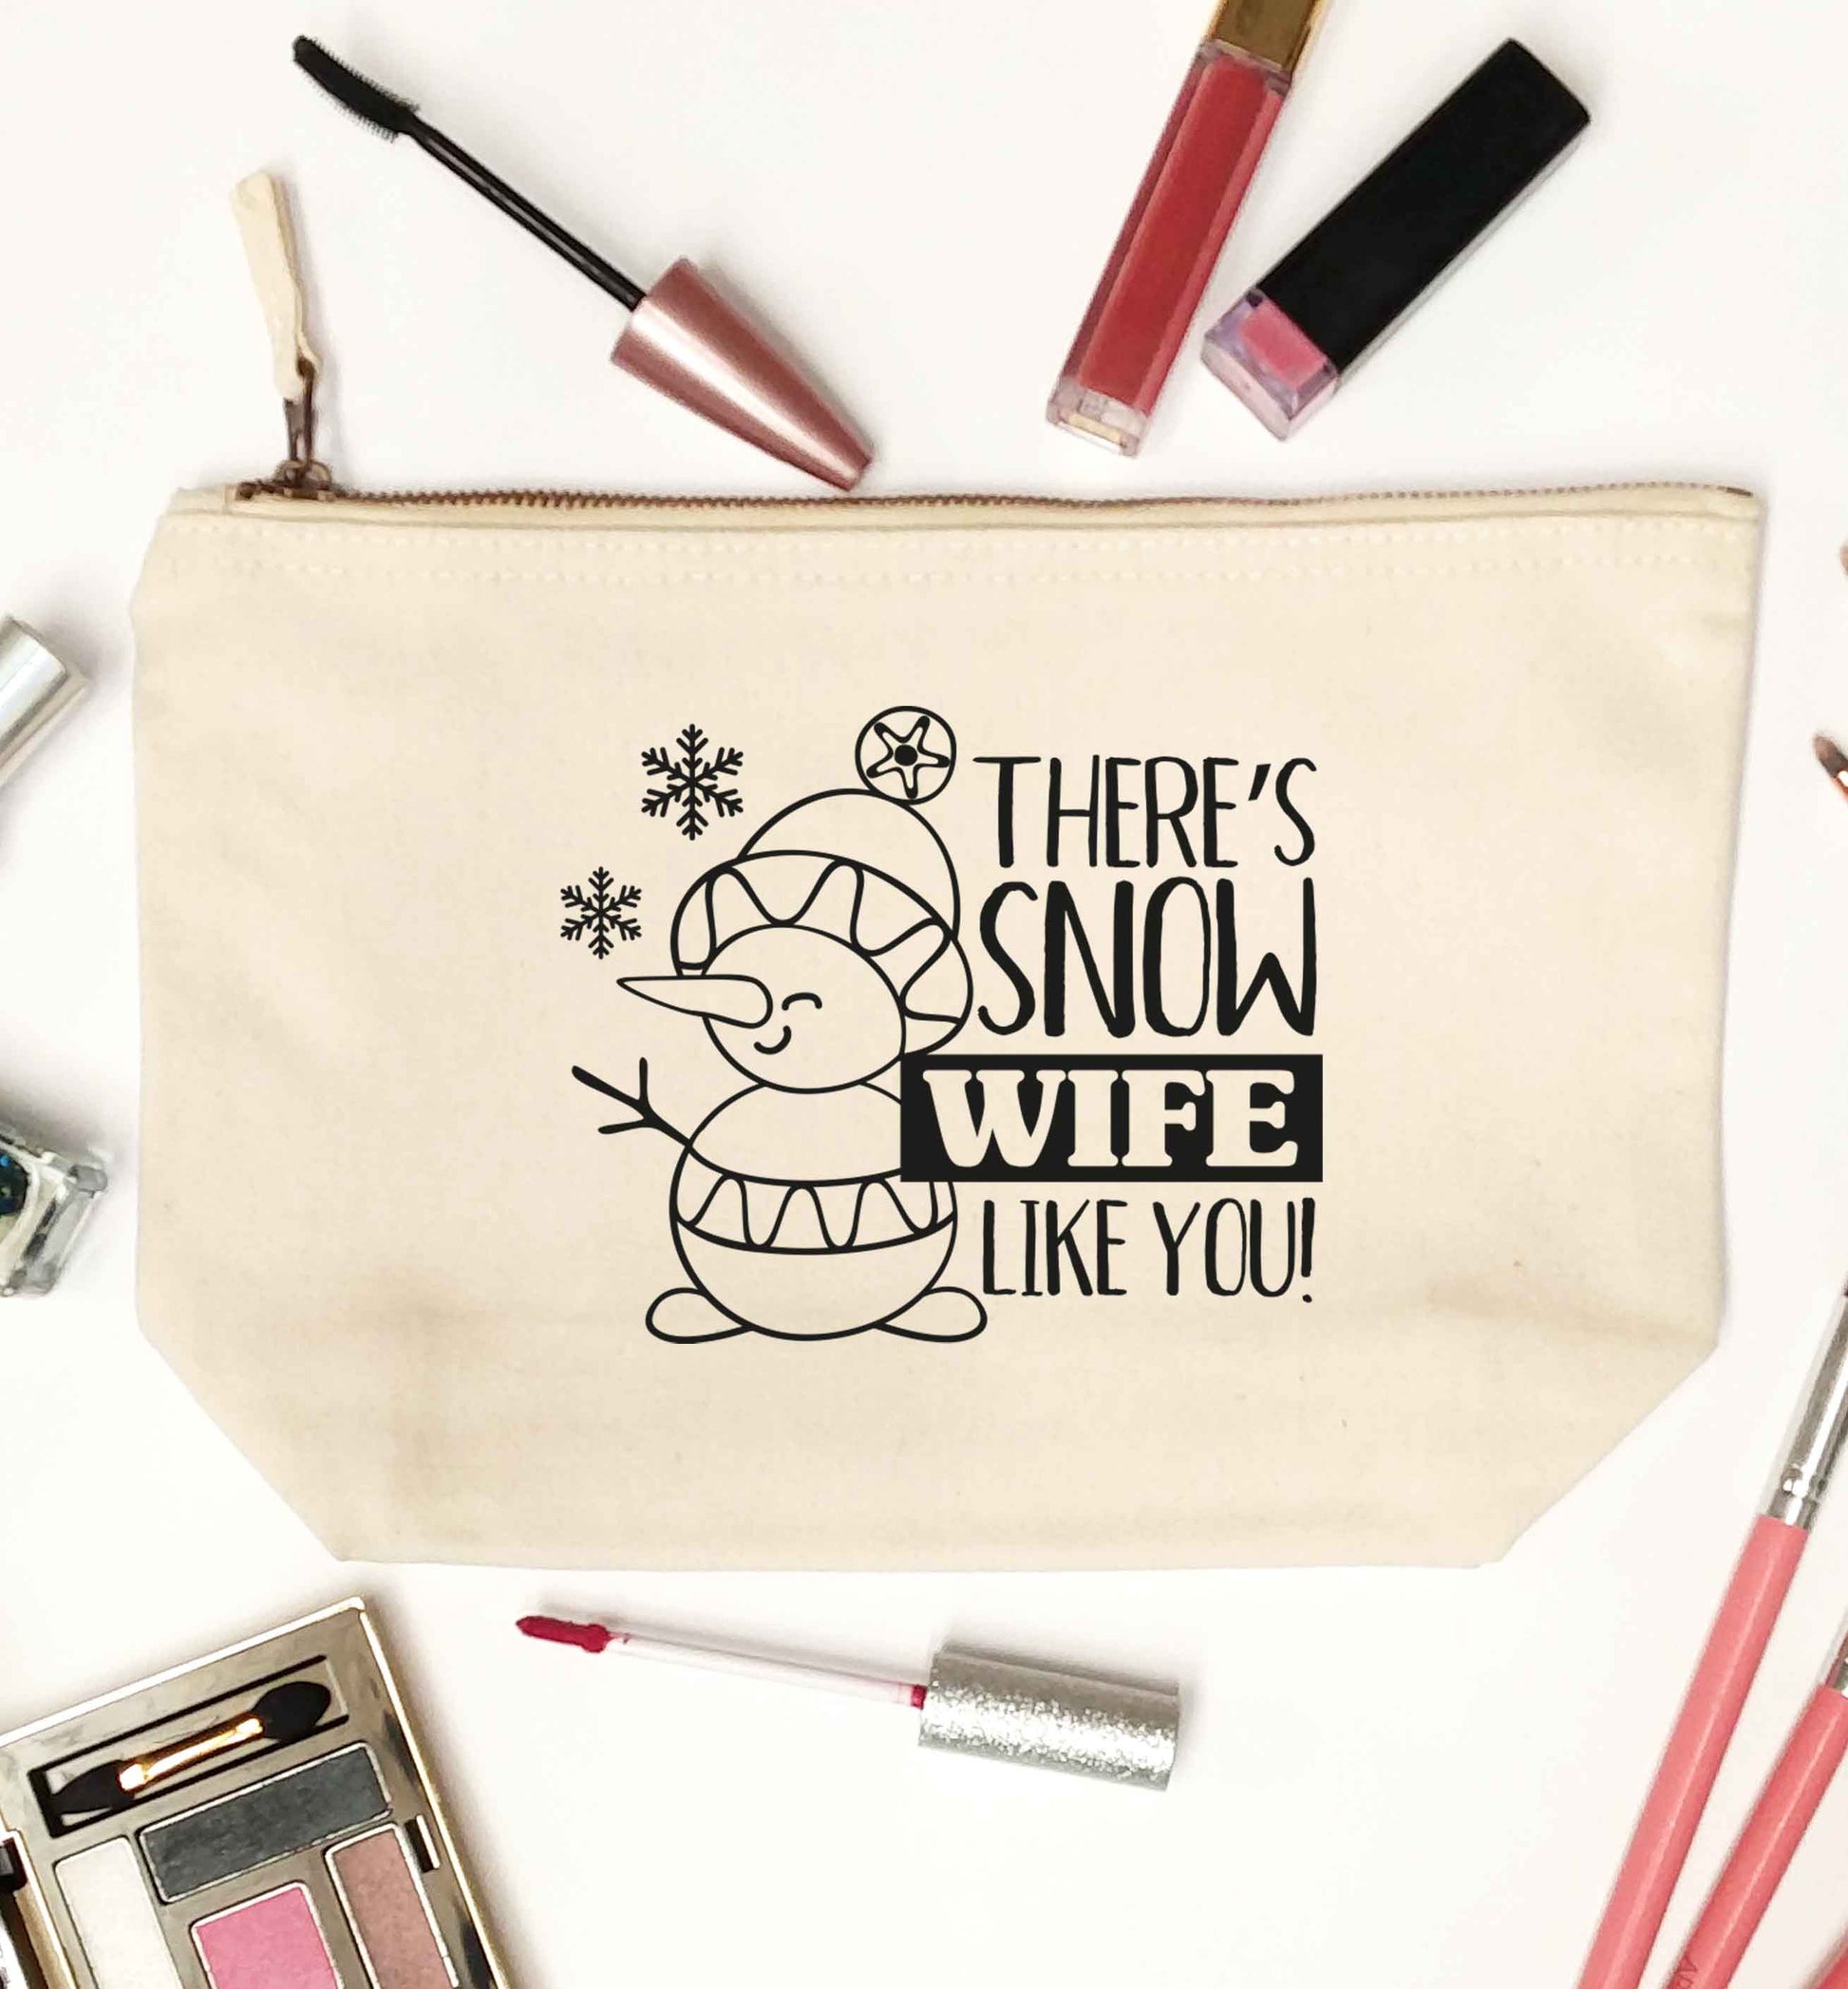 There's snow wife like you natural makeup bag